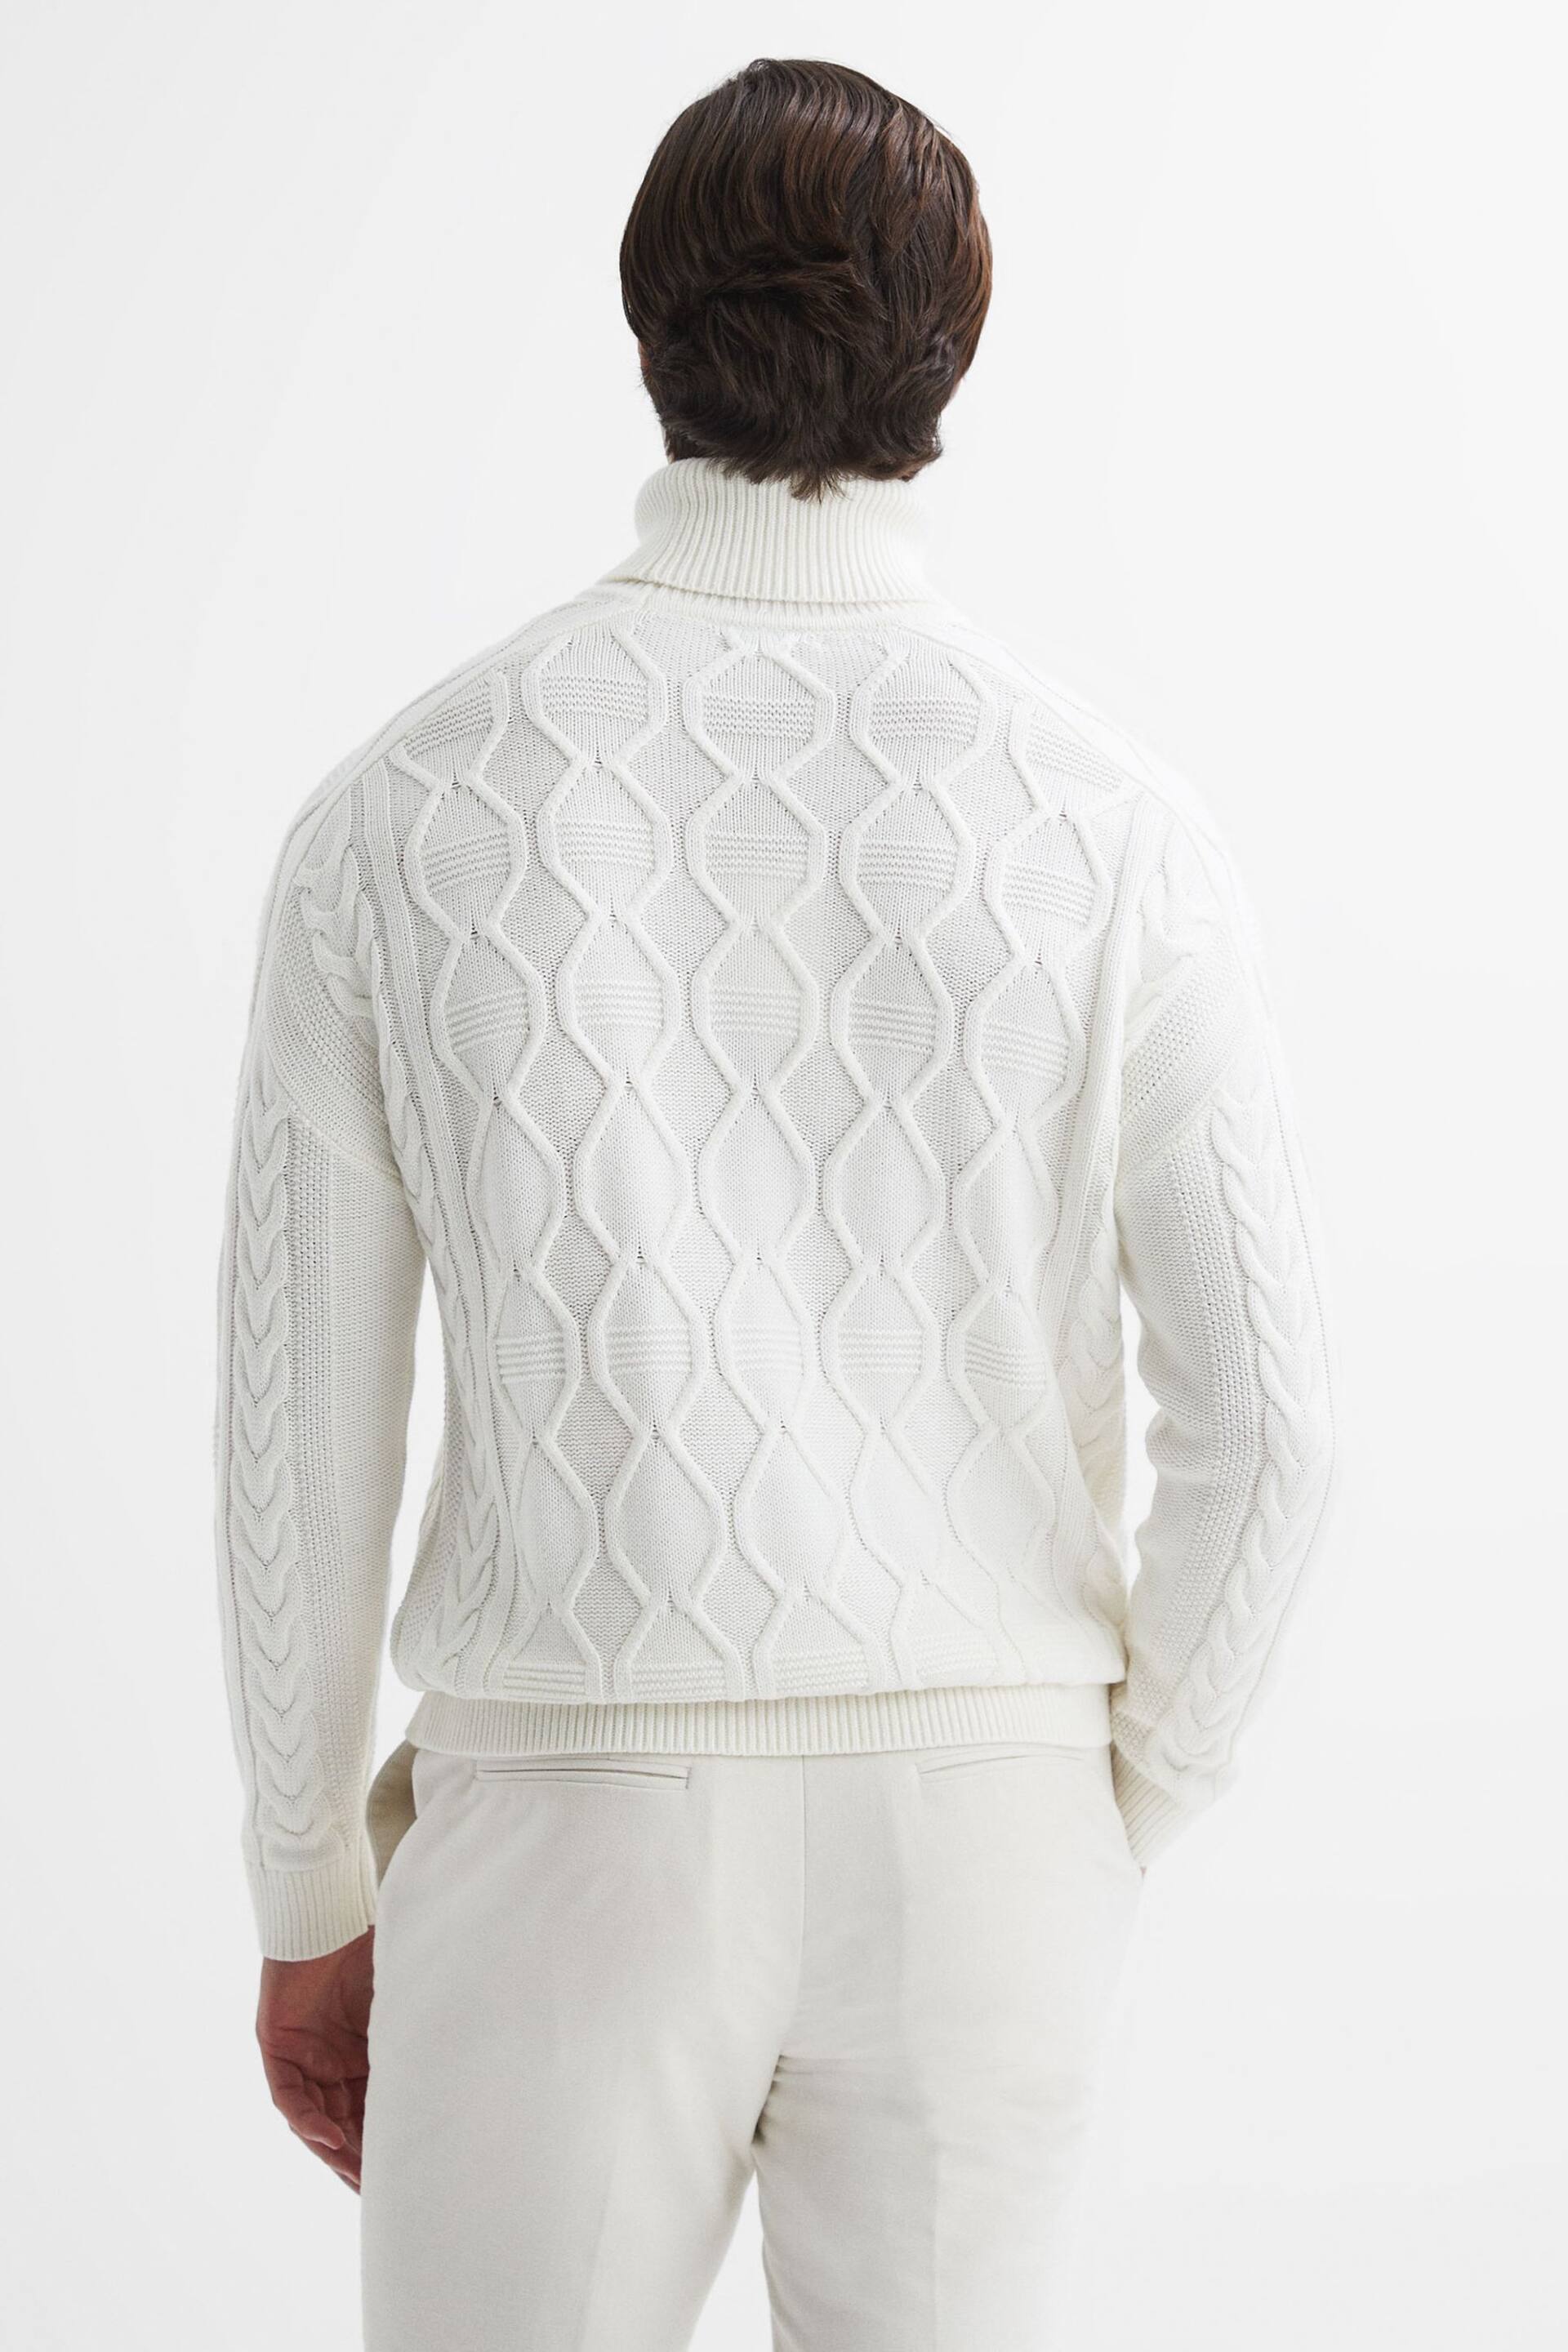 Reiss Ecru Alston Cable Knitted Roll Neck Jumper - Image 4 of 4